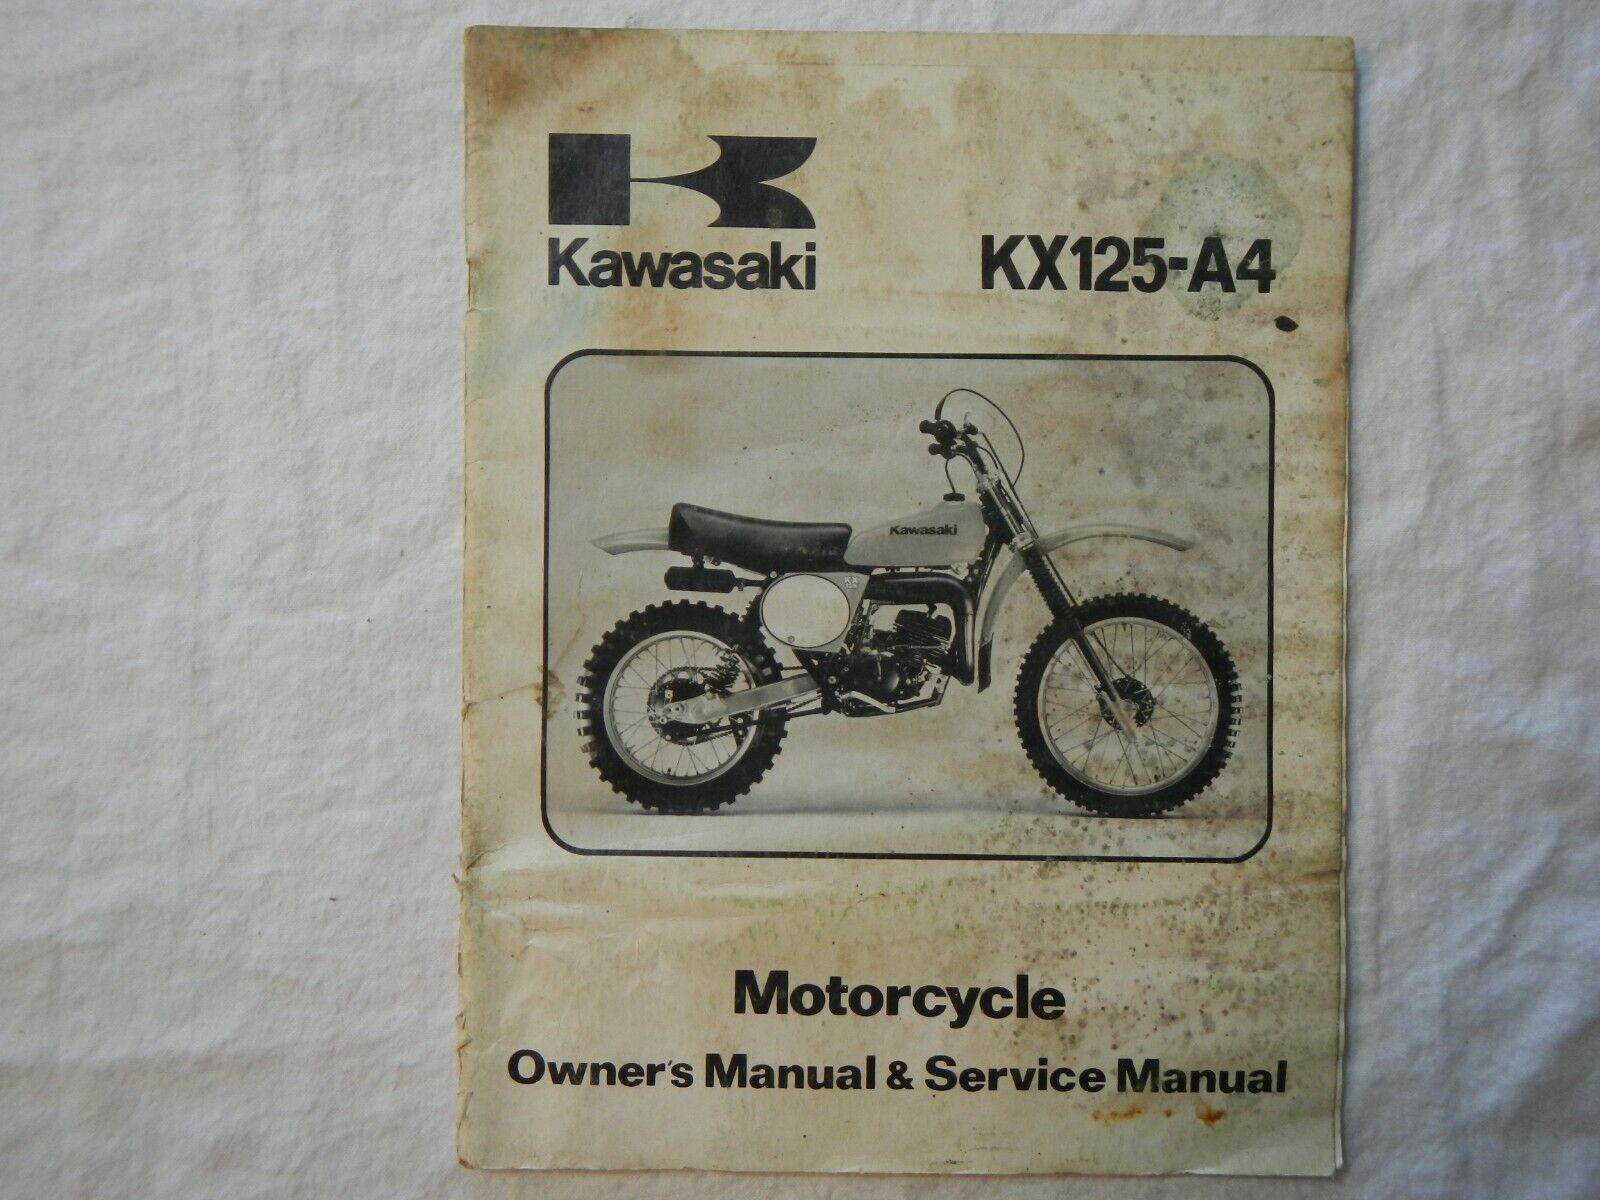 Primary image for 1978 Kawasaki KX125-A4 KX 125 A4 owner's service repair shop manual